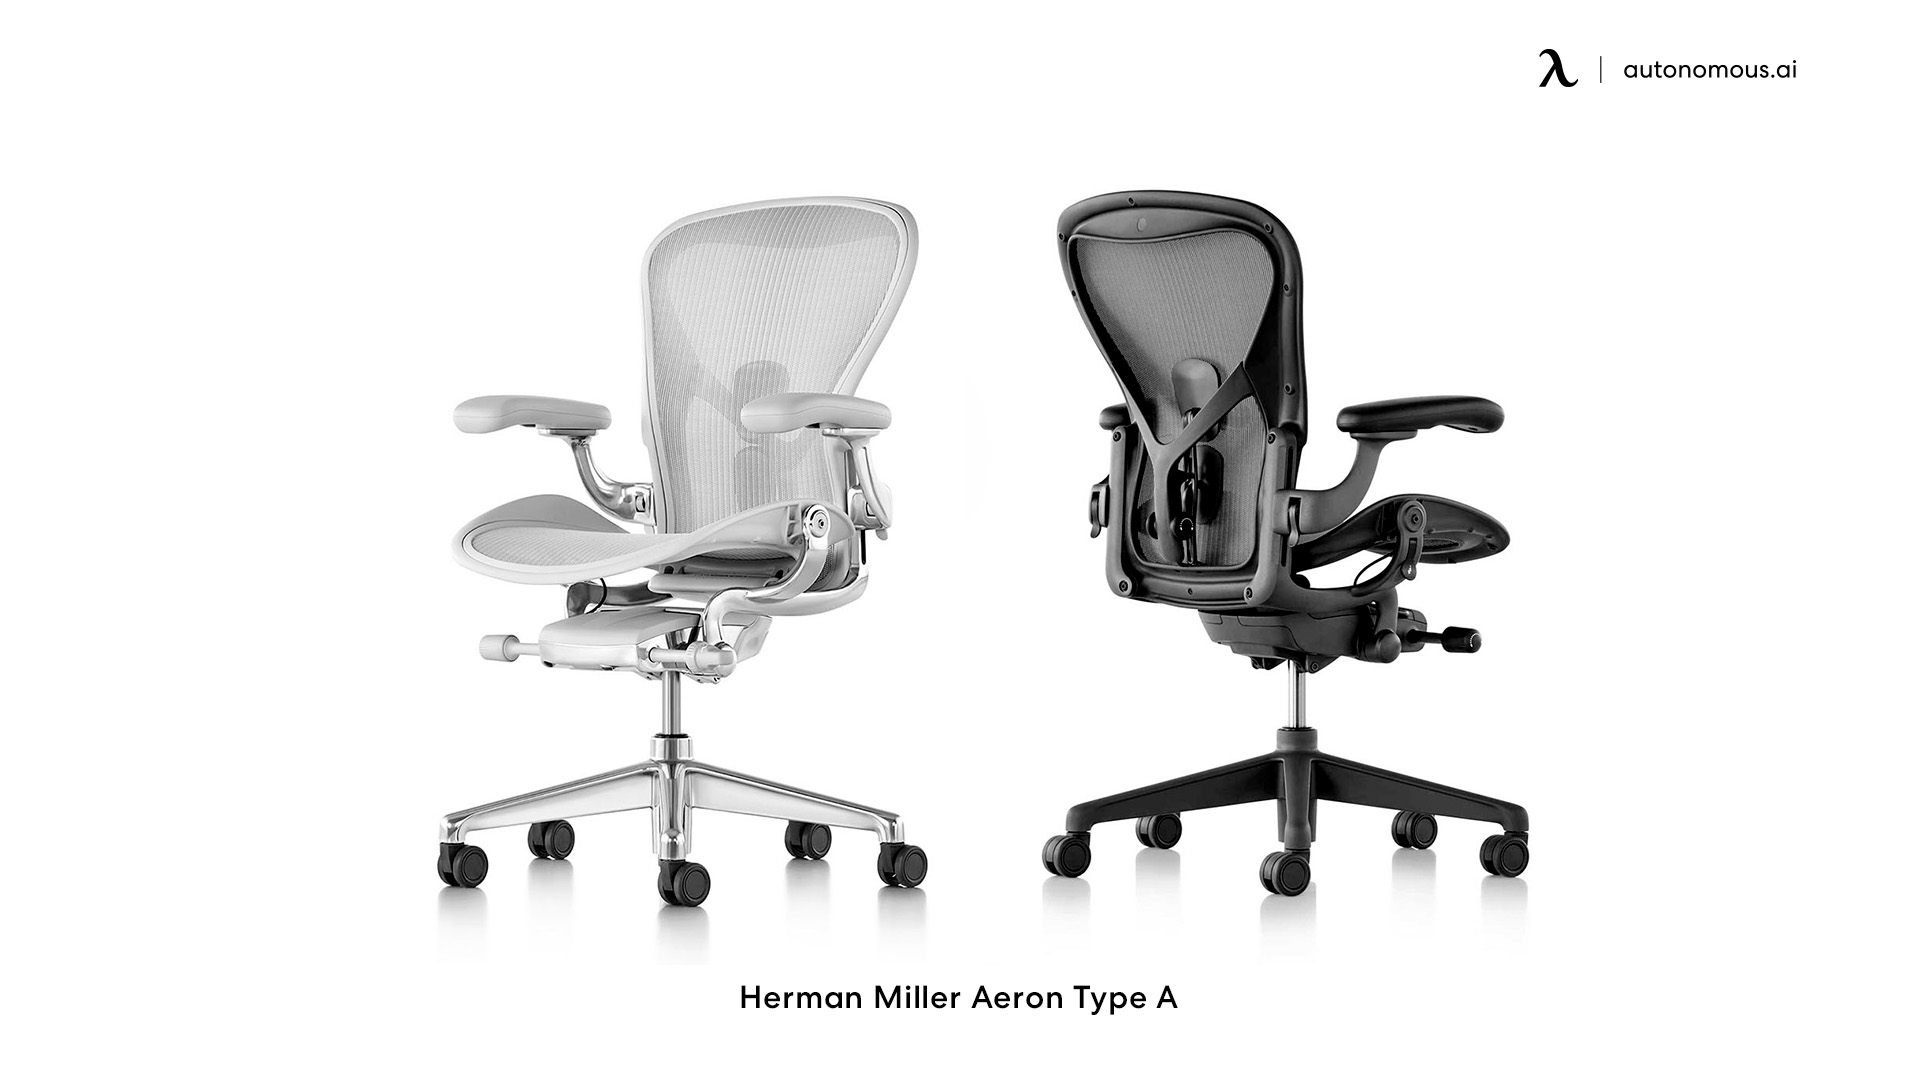 Herman Miller Aeron Type A small home office chair